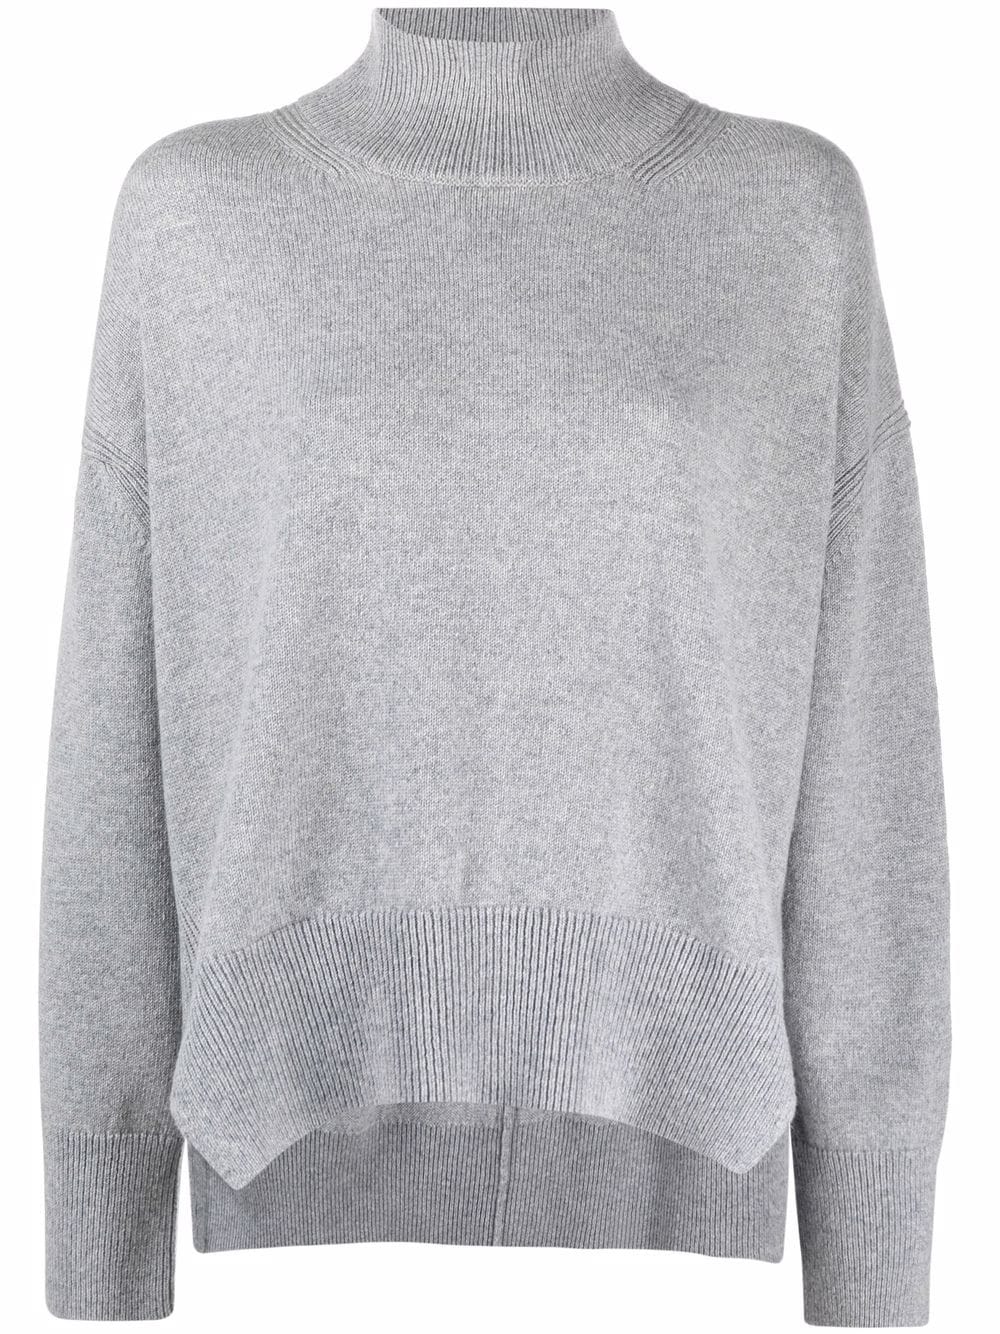 Barrie Iconic cashmere pullover - Grey von Barrie